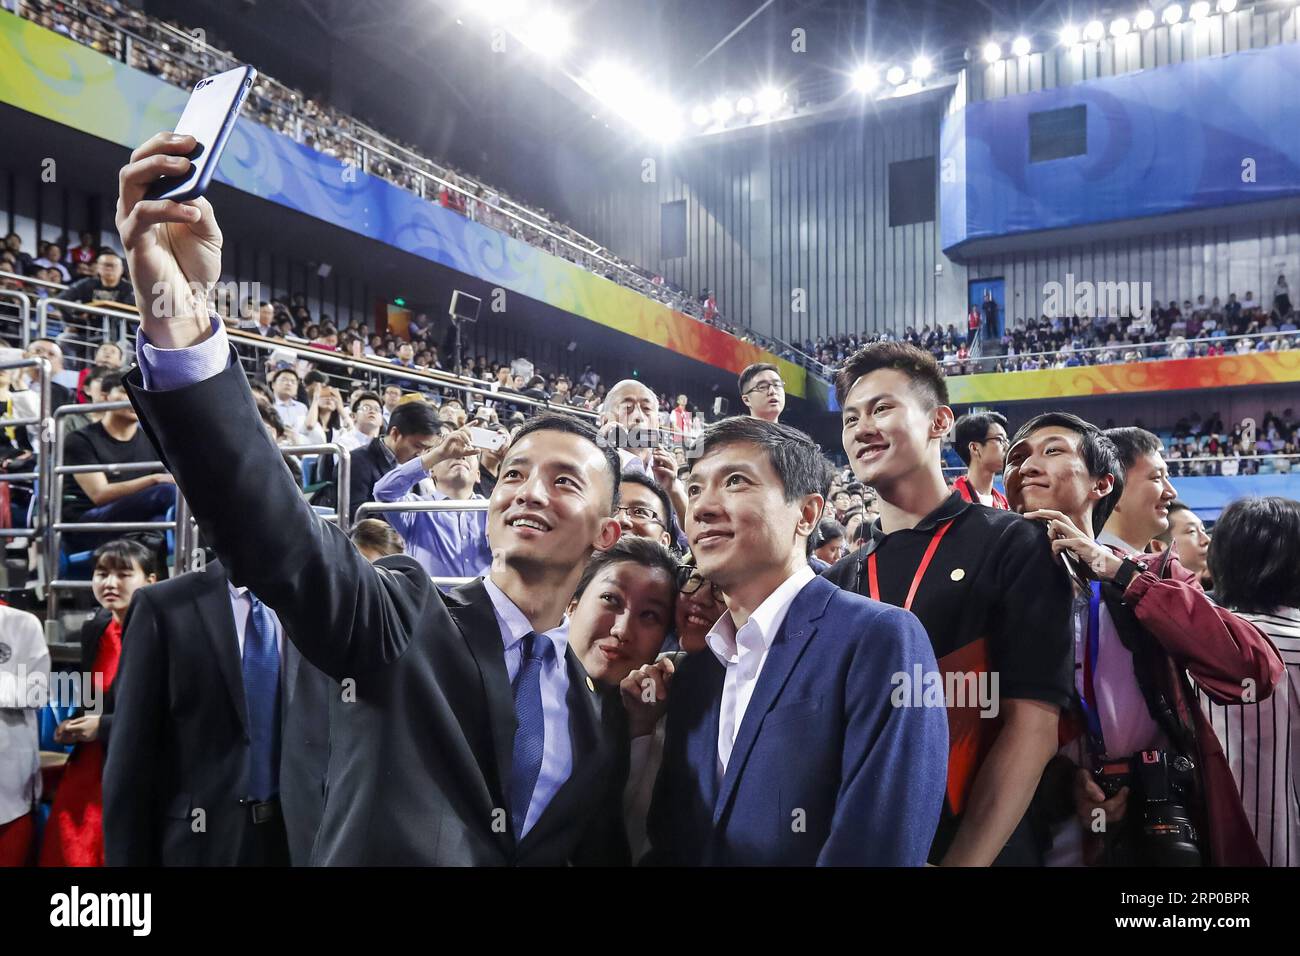 (180504) -- BEIJING, May 4, 2018 -- Peking University (PKU) alumnus Li Yanhong (R, front), who is also chair and CEO of China s Internet giant Baidu, poses for a selfie with others after a ceremony marking the 120th anniversary of the university at the Peking University Khoo Teck Puat Gymnasium in Beijing, capital of China, May 4, 2018. ) (lmm) CHINA-BEIJING-PEKING UNIVERSITY-120TH ANNIVERSARY (CN) ShenxBohan PUBLICATIONxNOTxINxCHN Stock Photo